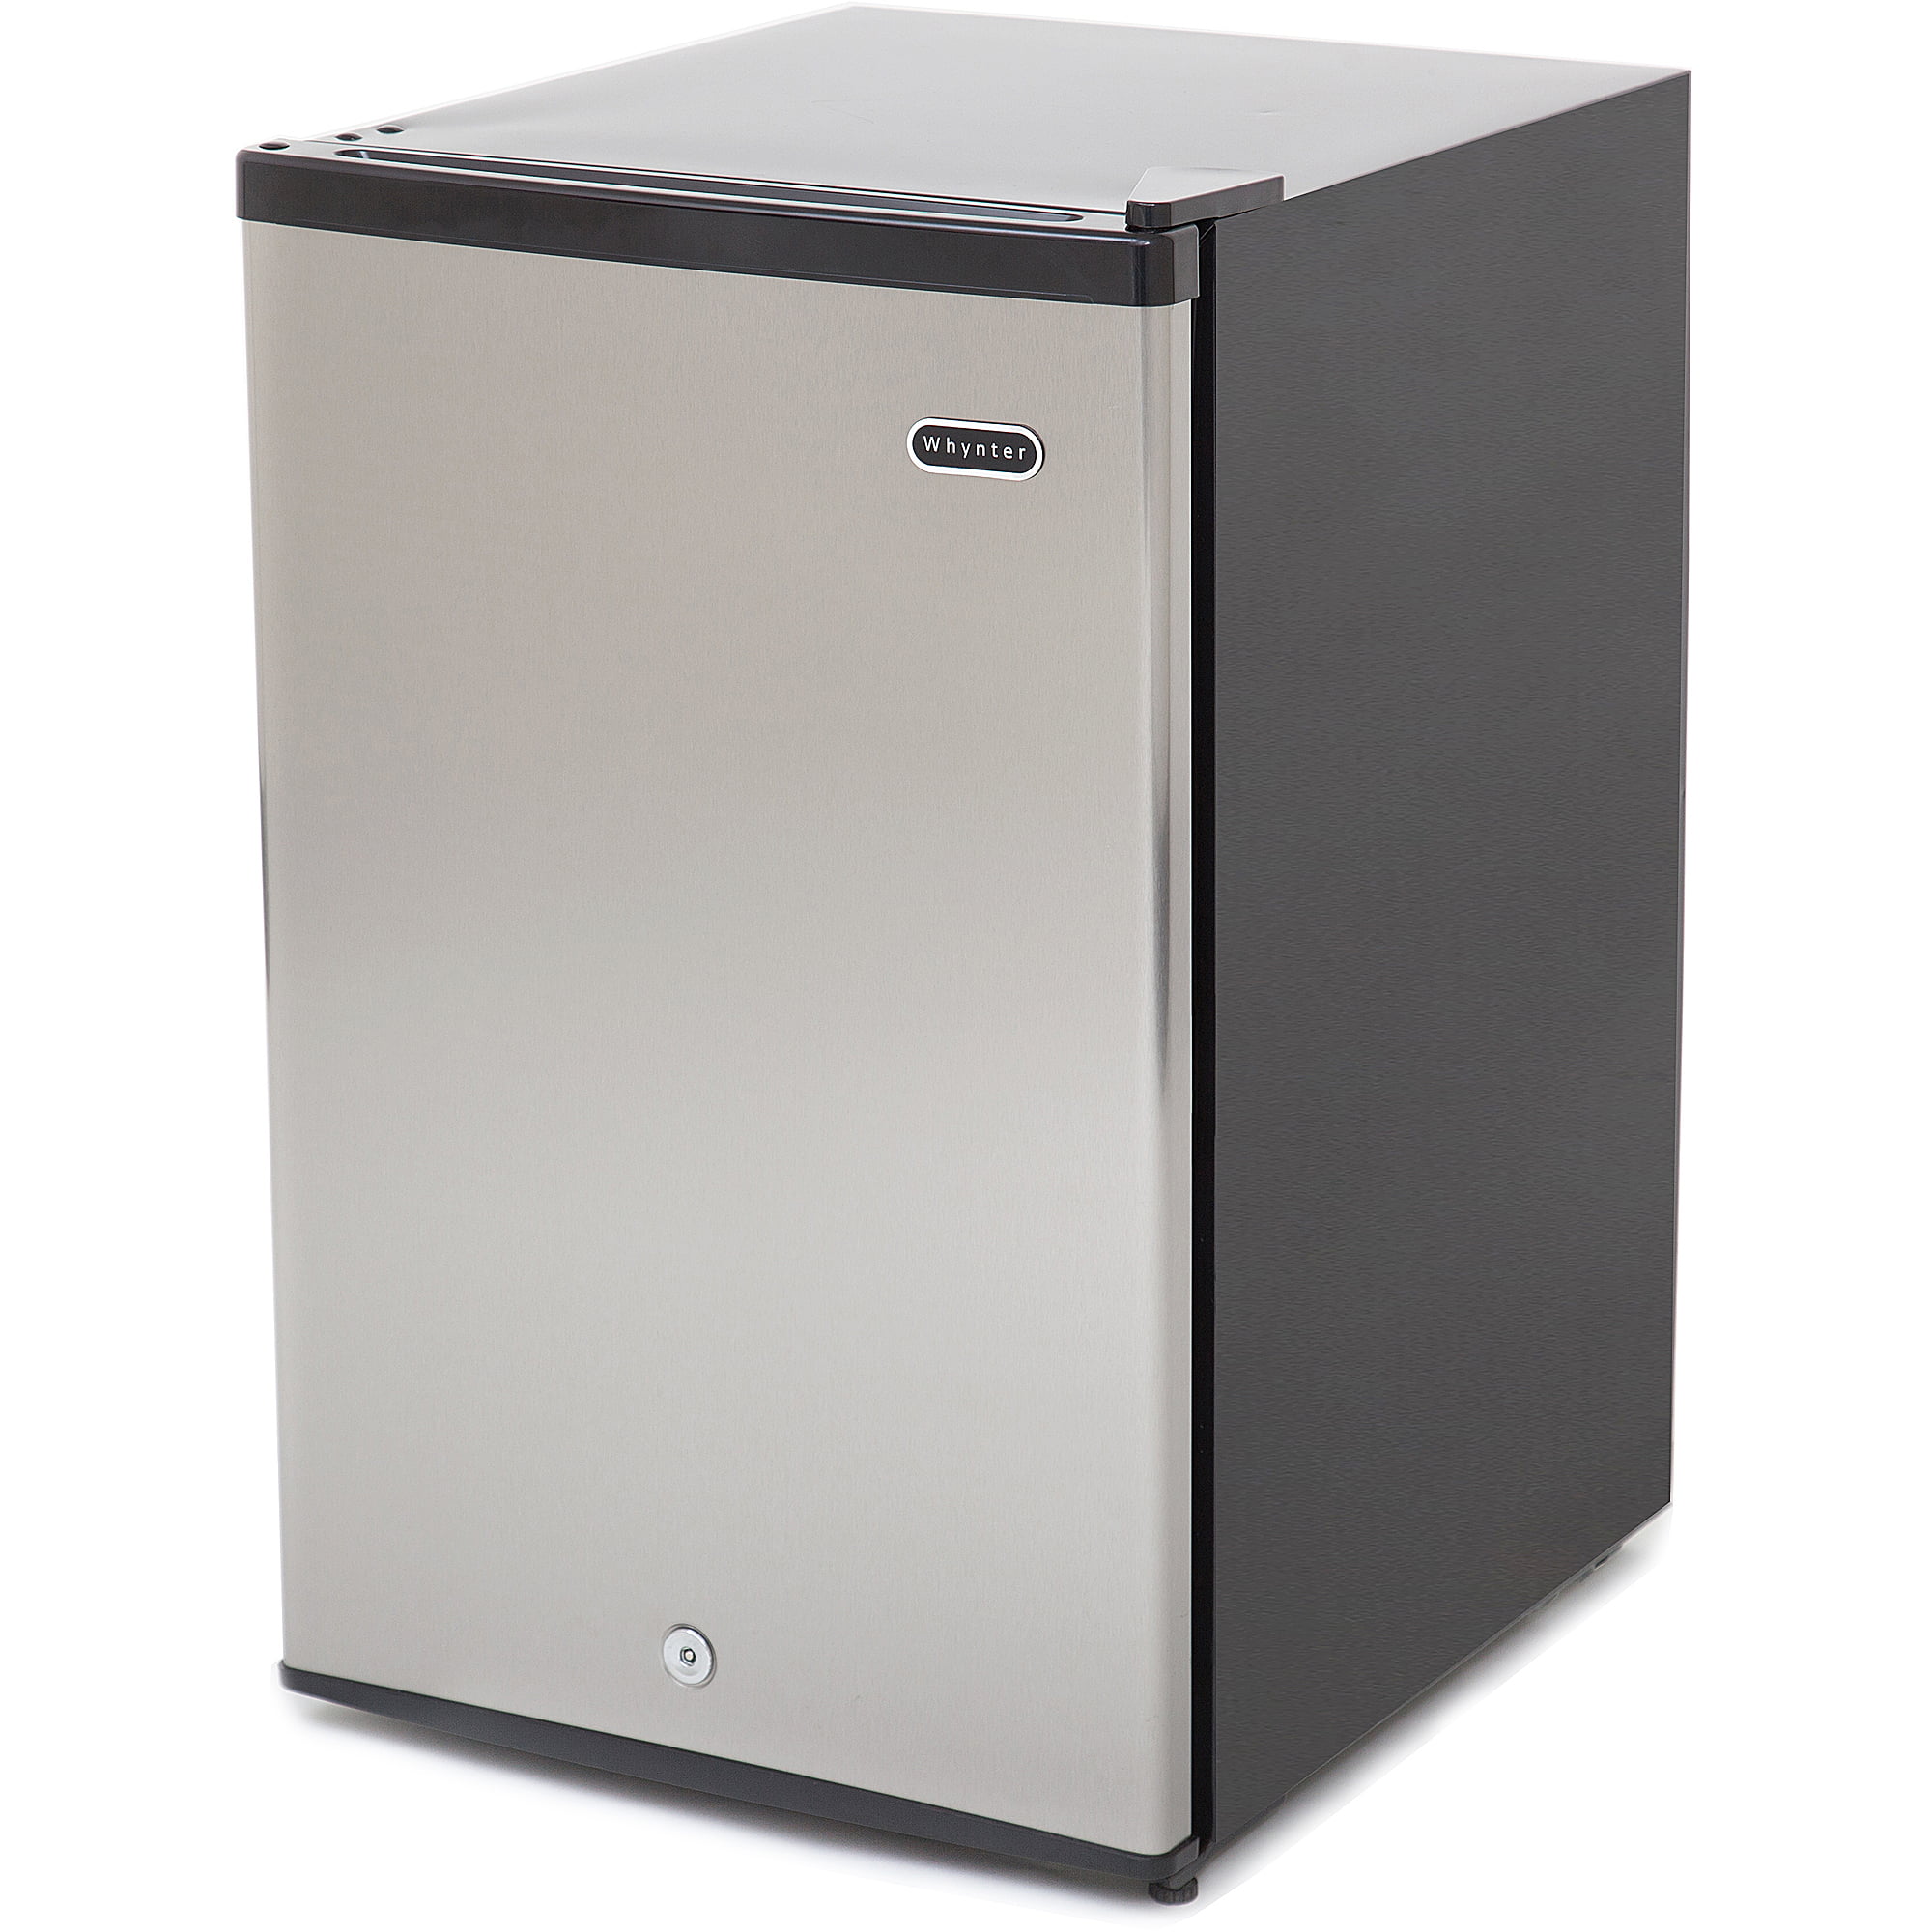 Whynter Cuf-210SS Energy Star Stainless Steel Upright Freezer with Lock,  2.1 cu ft